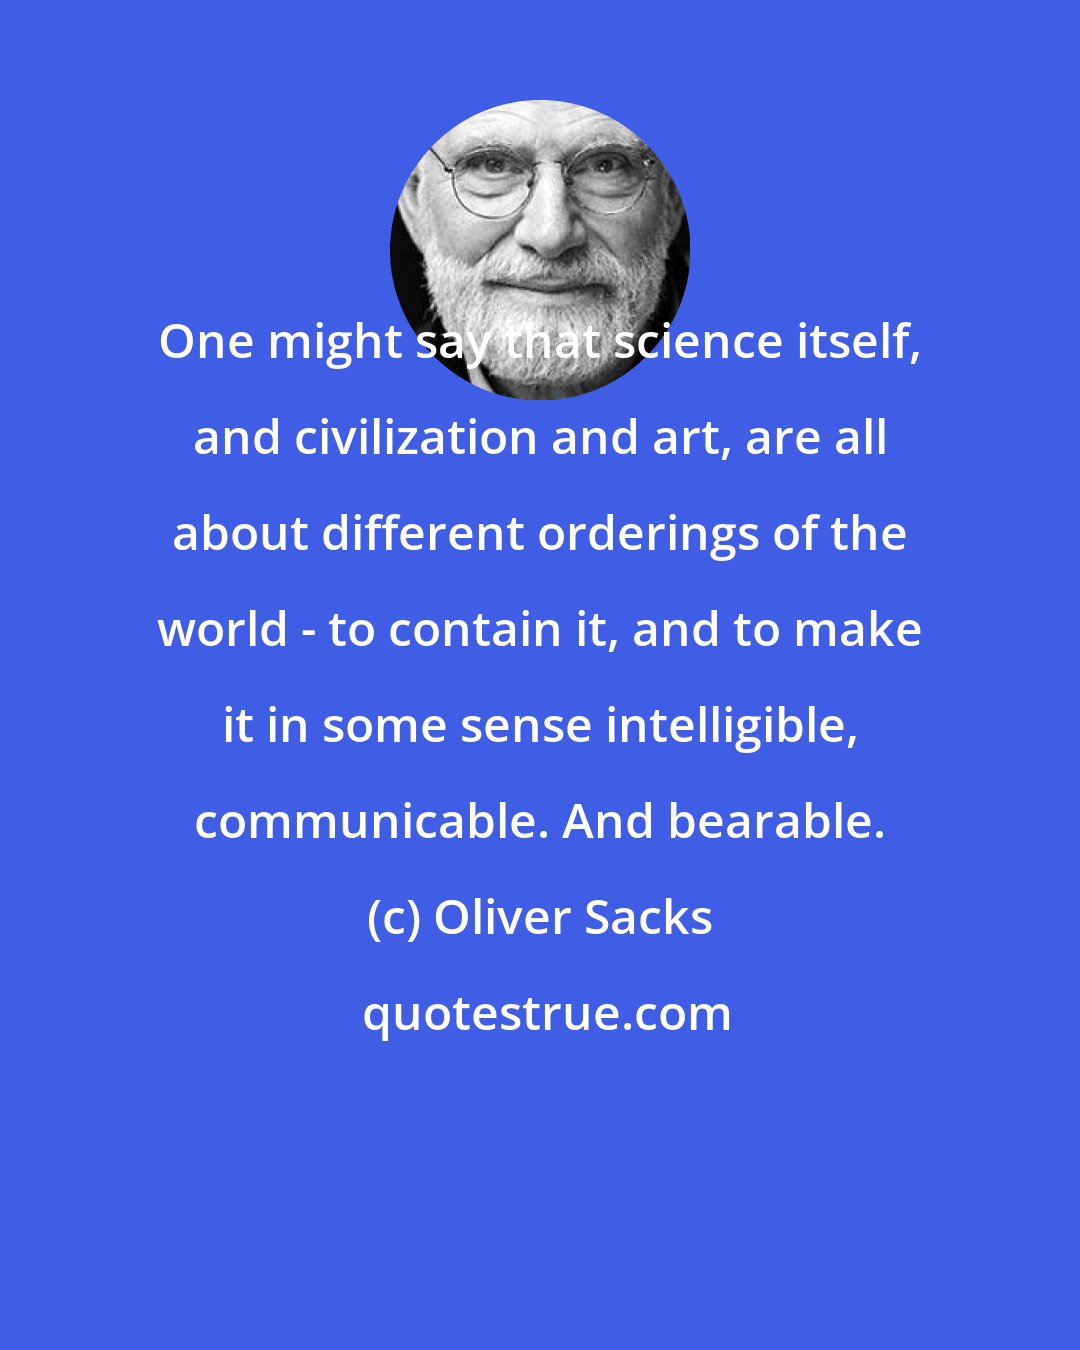 Oliver Sacks: One might say that science itself, and civilization and art, are all about different orderings of the world - to contain it, and to make it in some sense intelligible, communicable. And bearable.